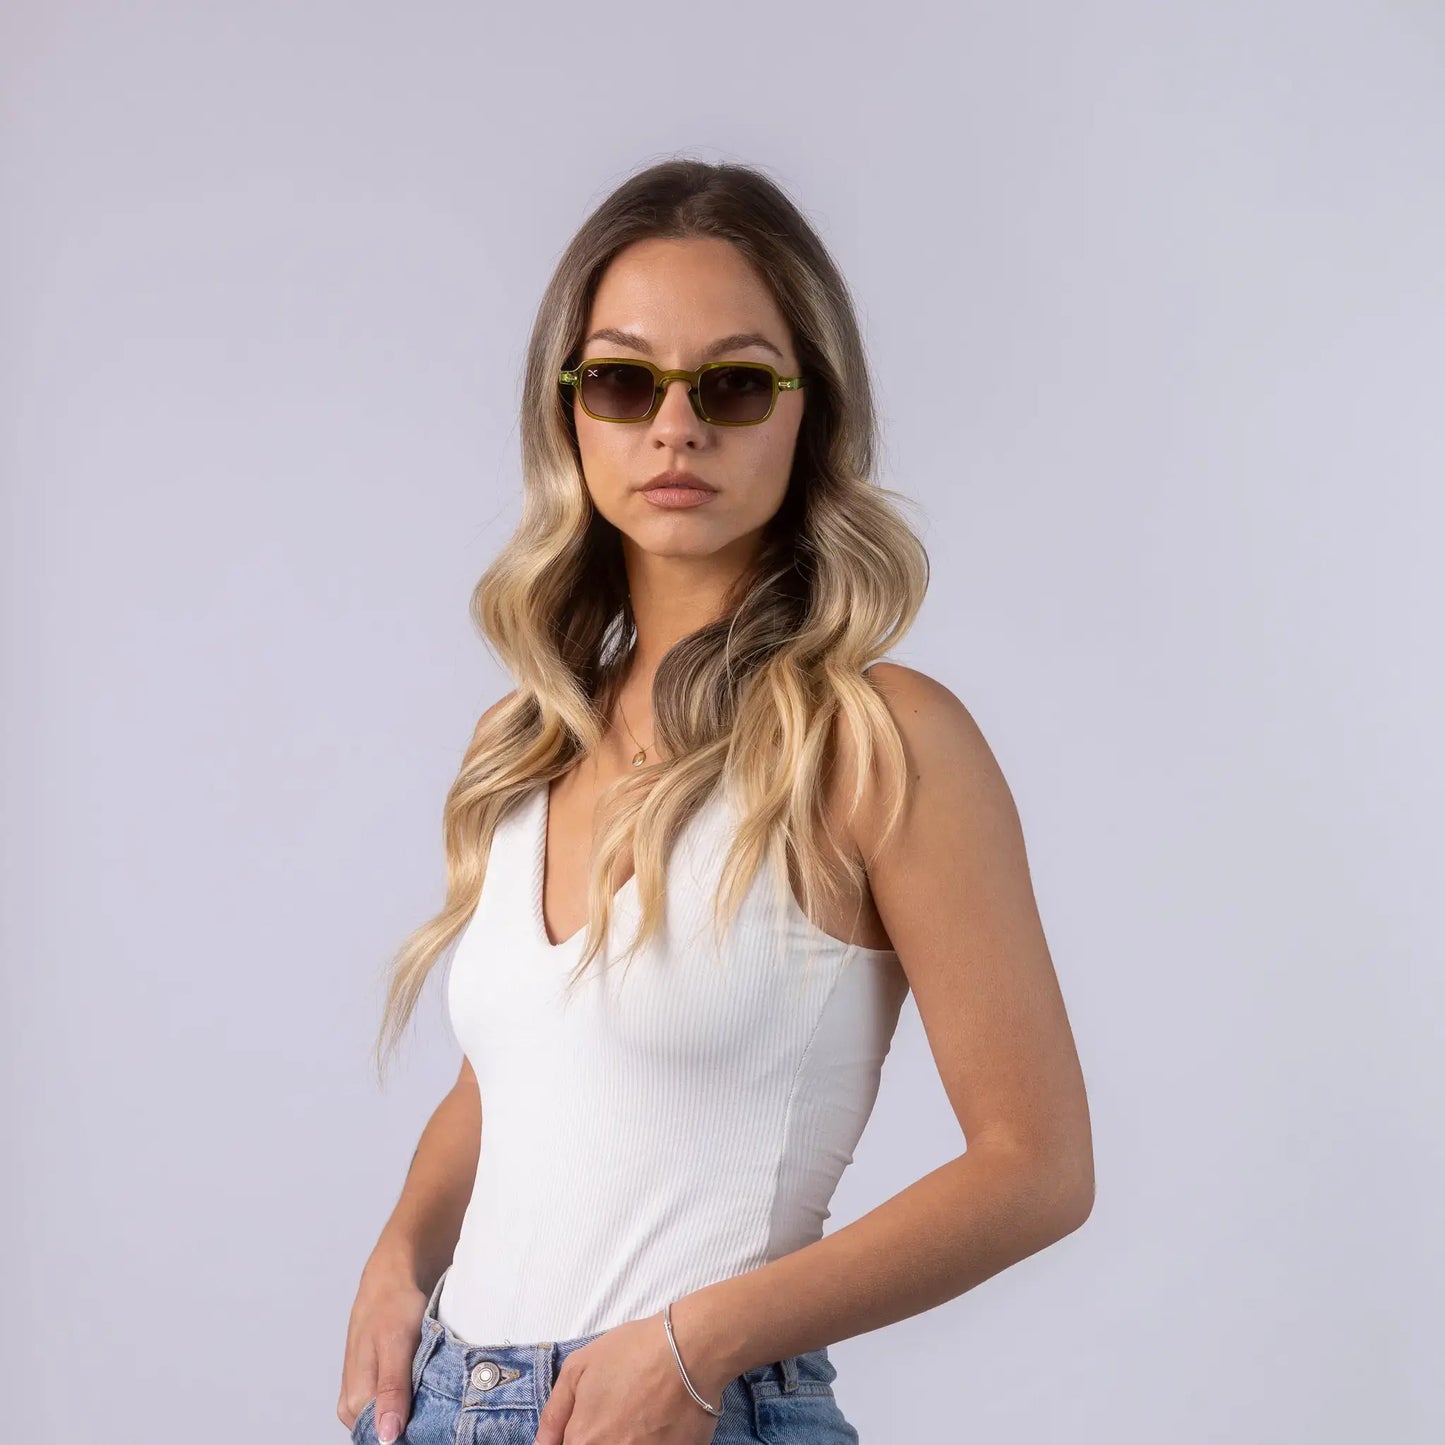 A female model wearing Exposure Sunglasses polarized sunglasses with green frames and green lenses, posing against a white background.